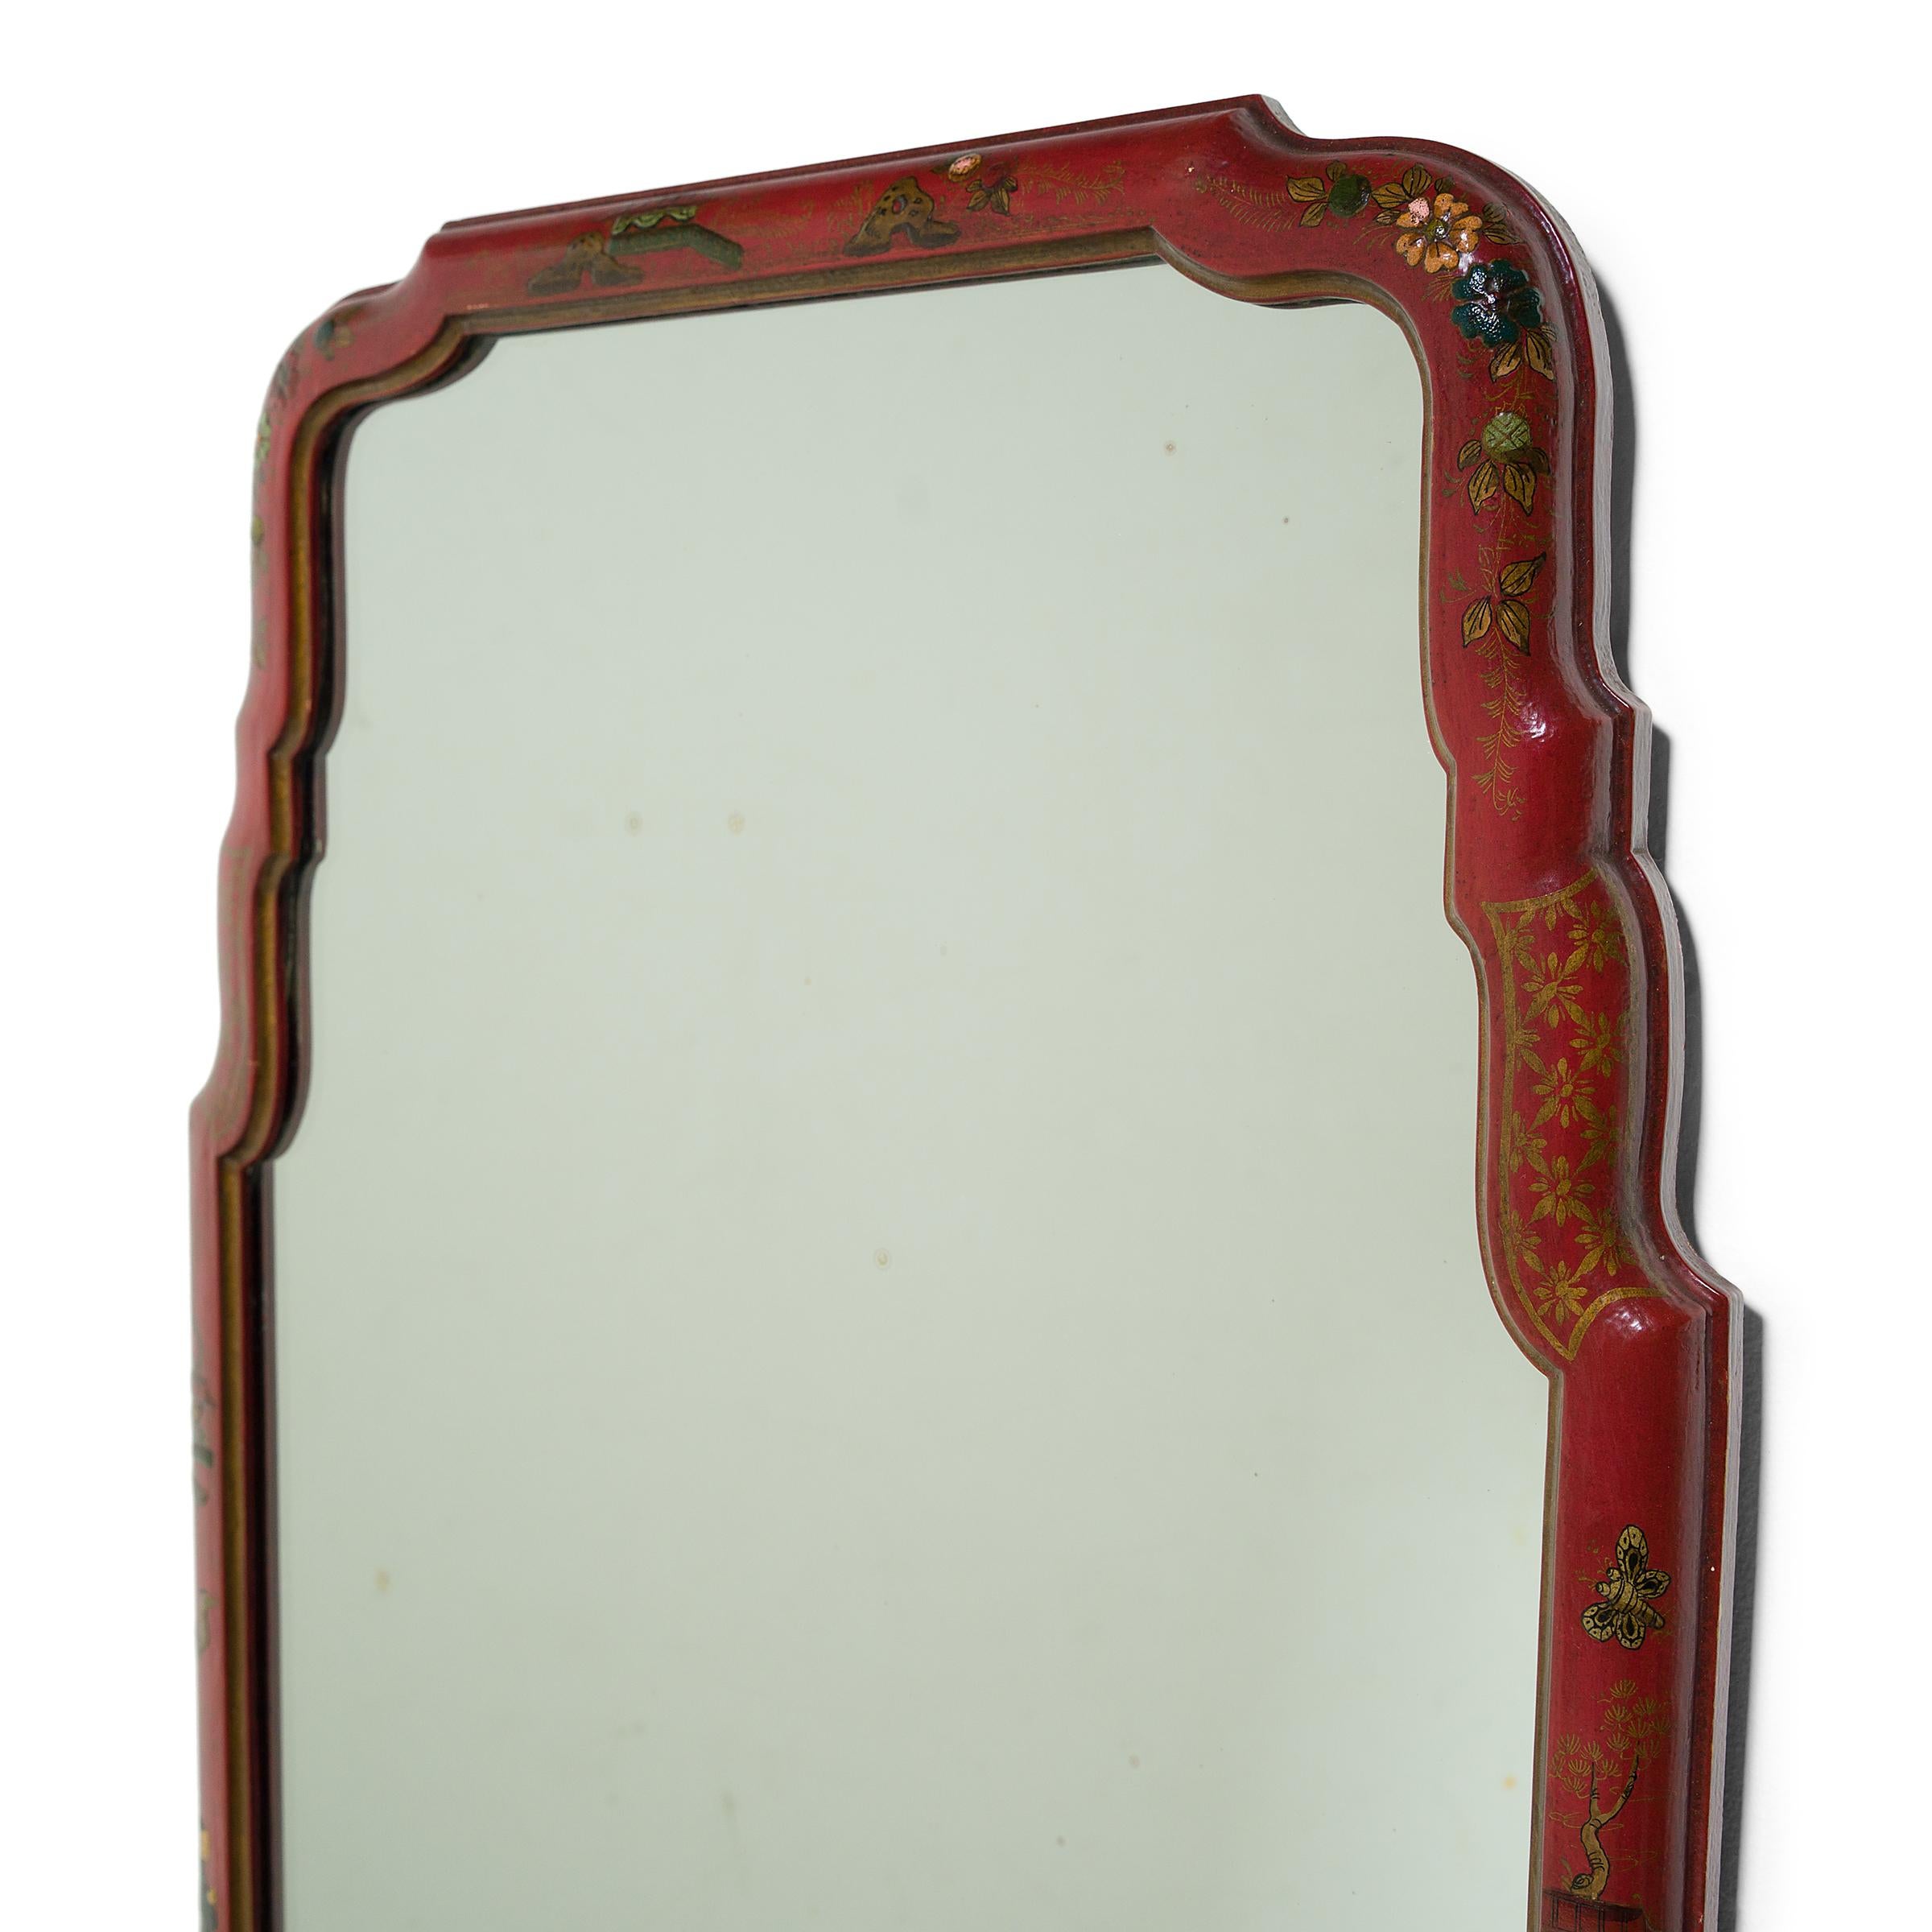 This vintage wall mirror has an elongated form, with a rectangular base and arched top shaped by sinuous, stepped corners. The mirror is decorated in the chinoiserie style, painted with robed figures, floral motifs, and auspicious objects atop a red